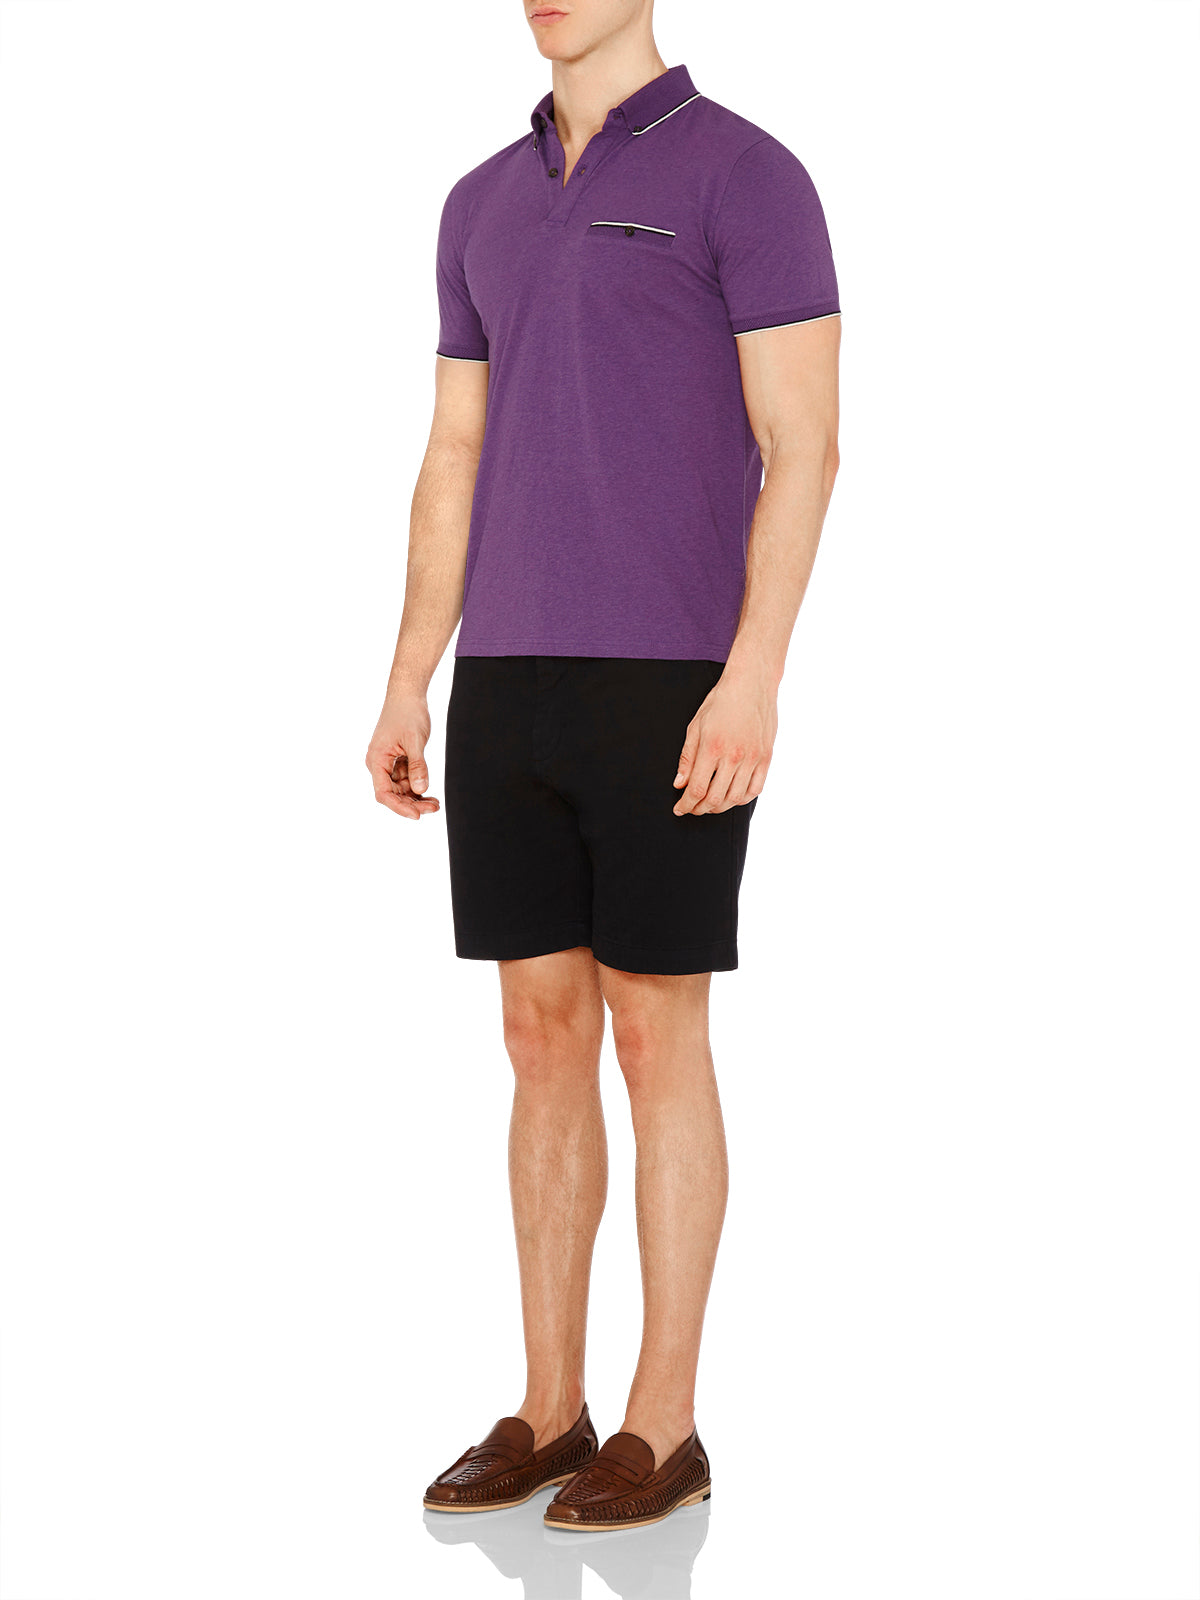 ANDY JERSEY POLO PURPLE MENS KNITS